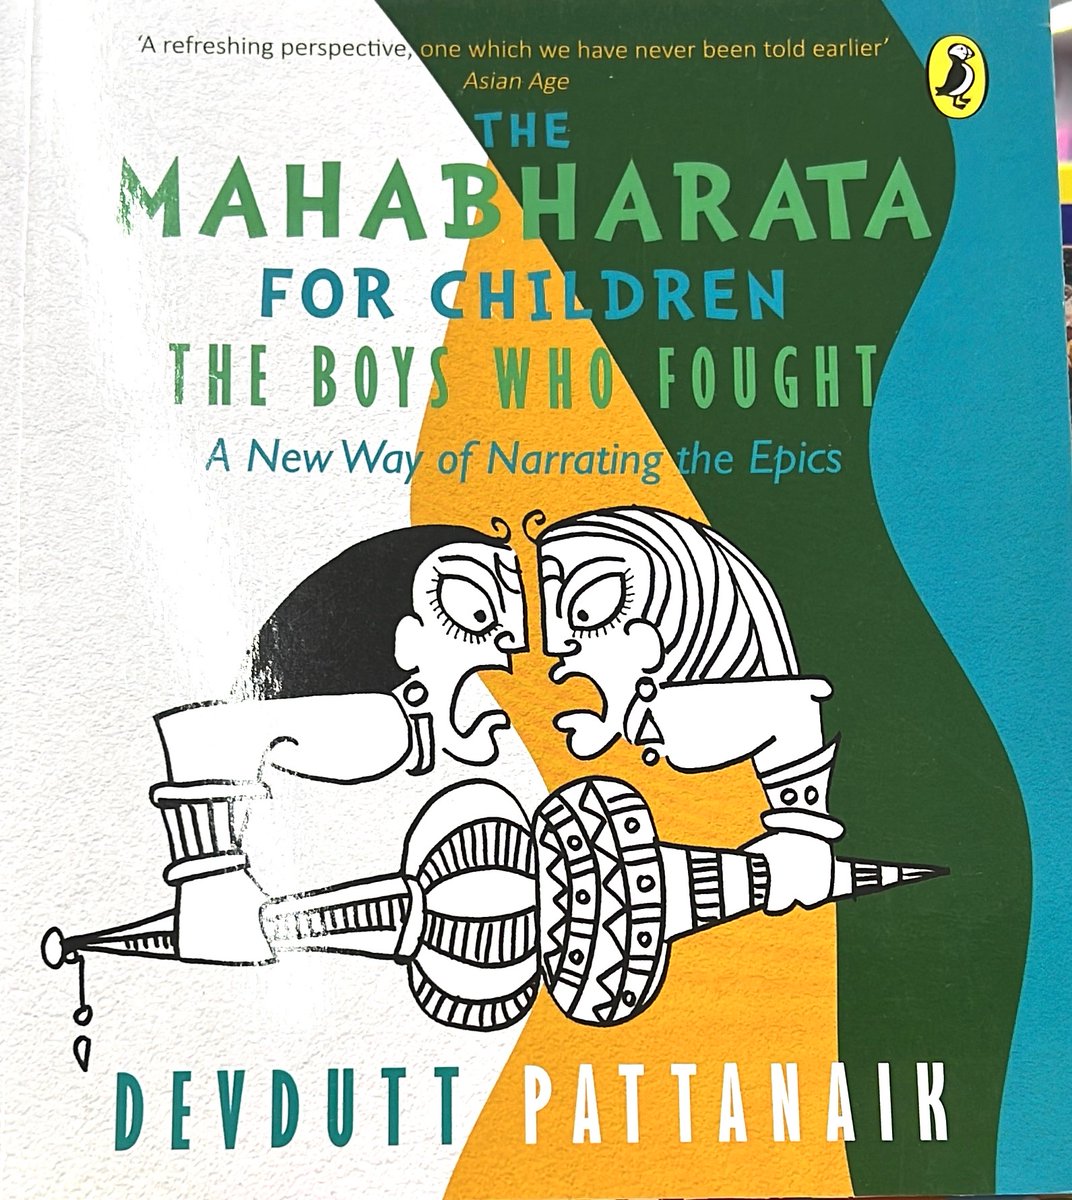 “You should not have the Mahabharata in your house!” 

Okay! Now it all makes sense!